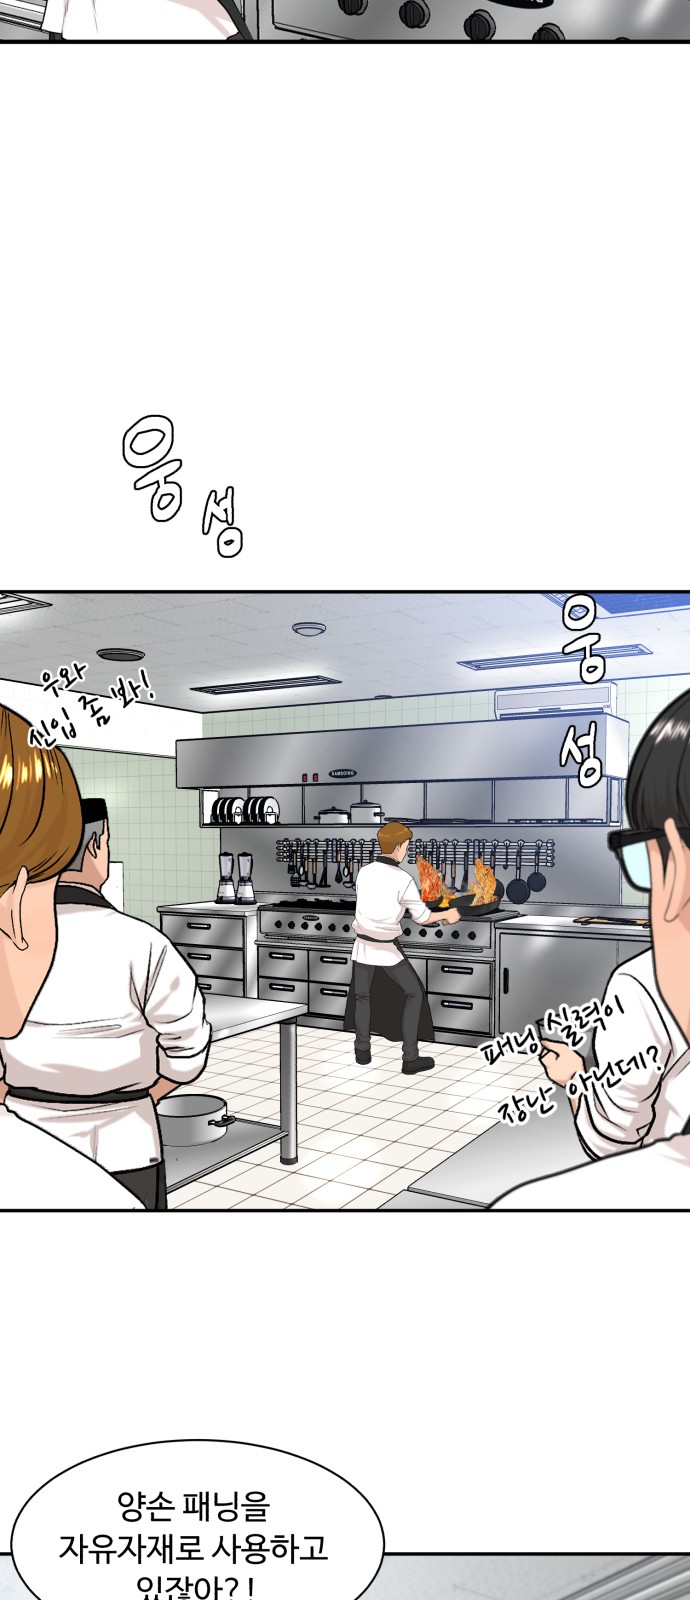 Cooking GO! - Chapter 121 - Page 4